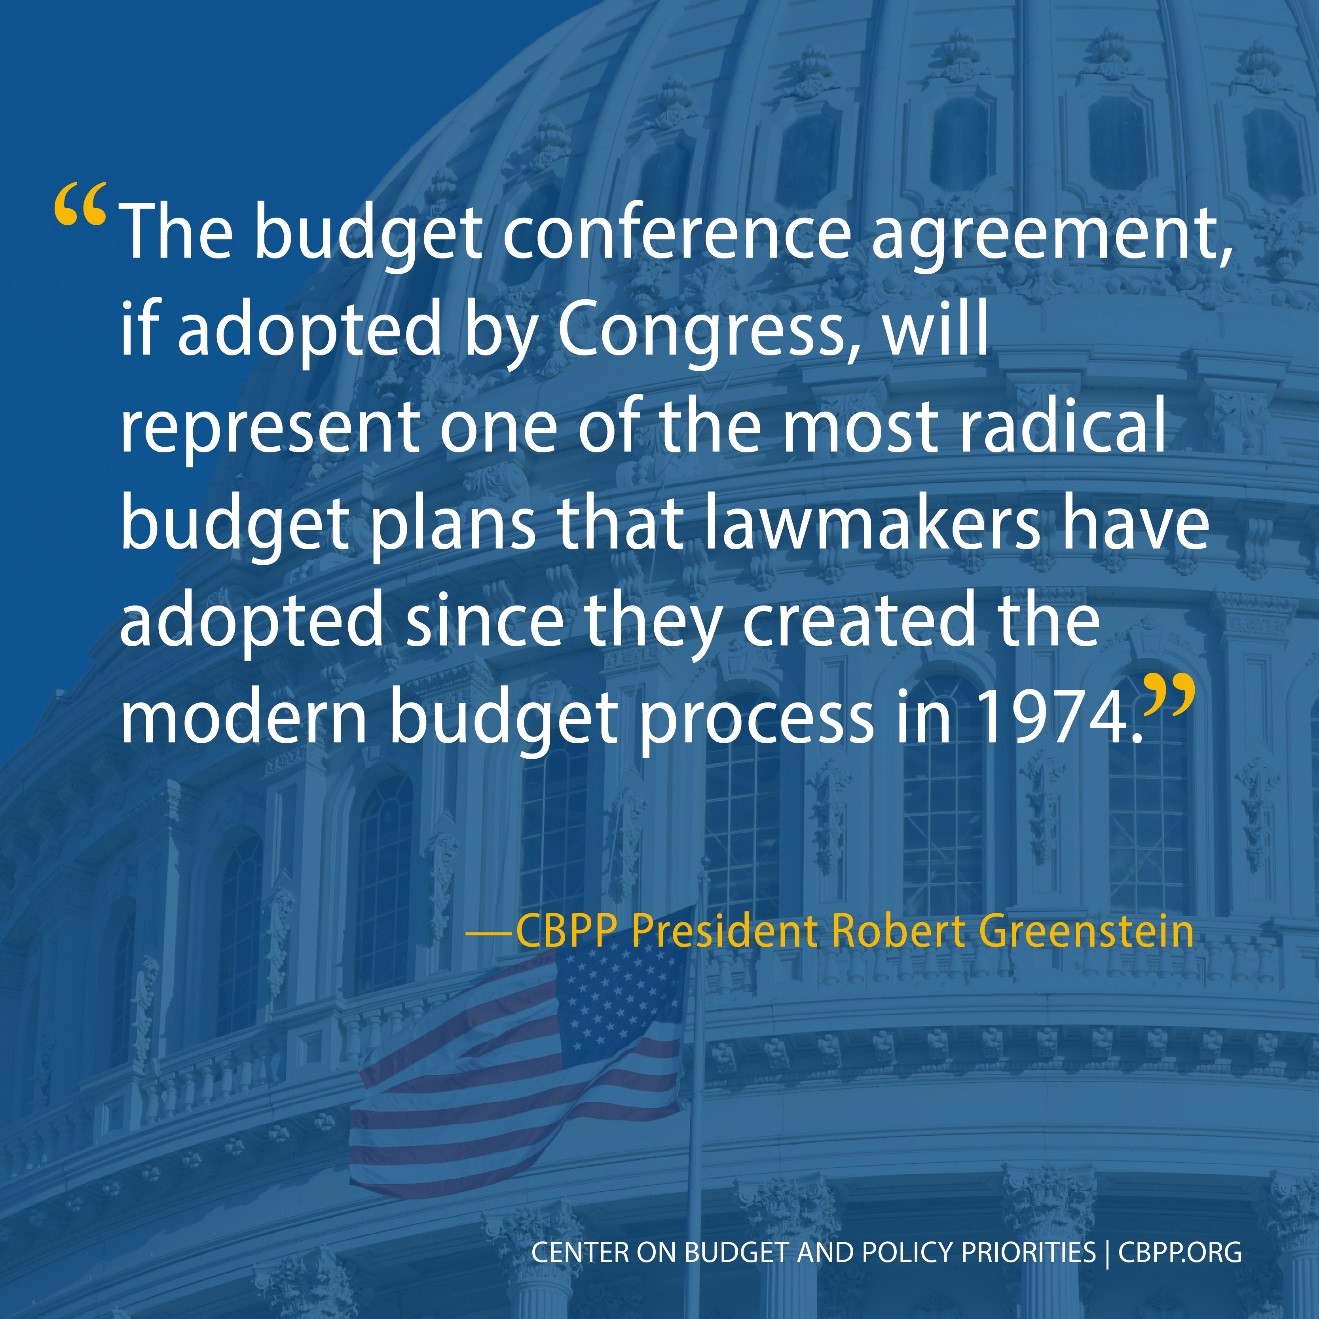 The budget conference agreement, if adopted by Congress...